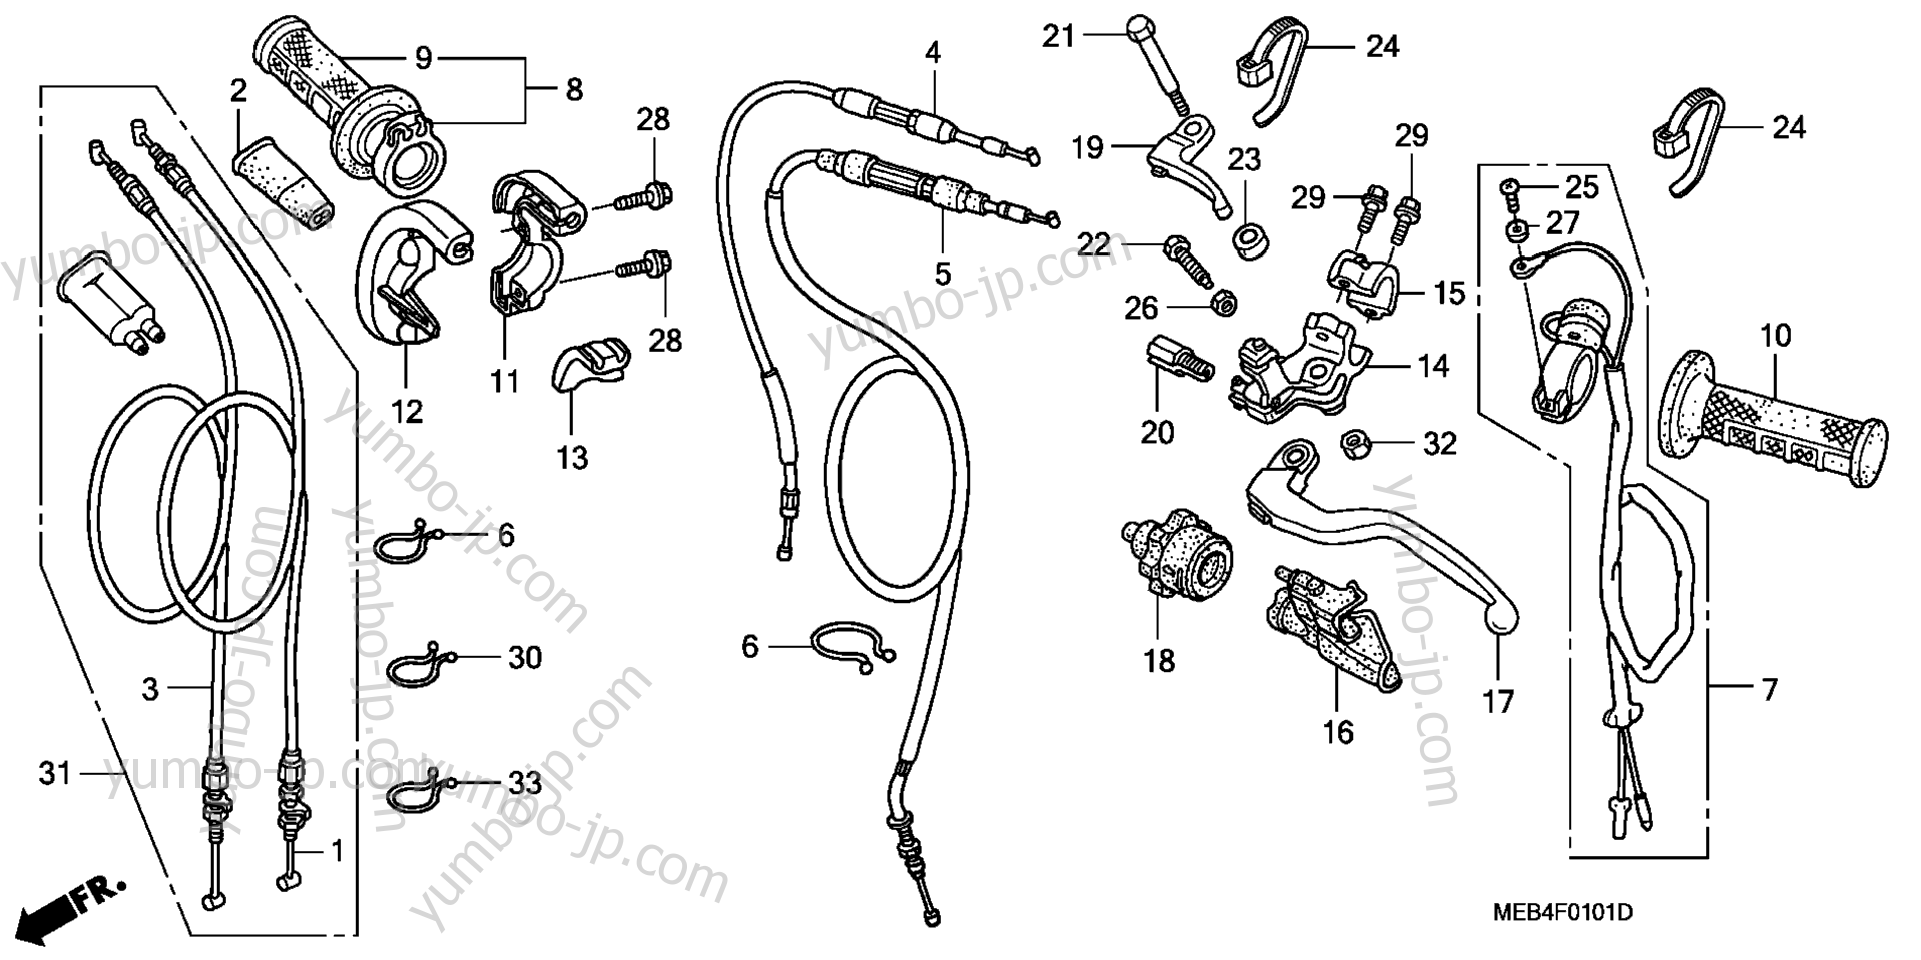 HANDLE LEVER / SWITCH / CABLE ('04-) for motorcycles HONDA CRF450R A 2006 year